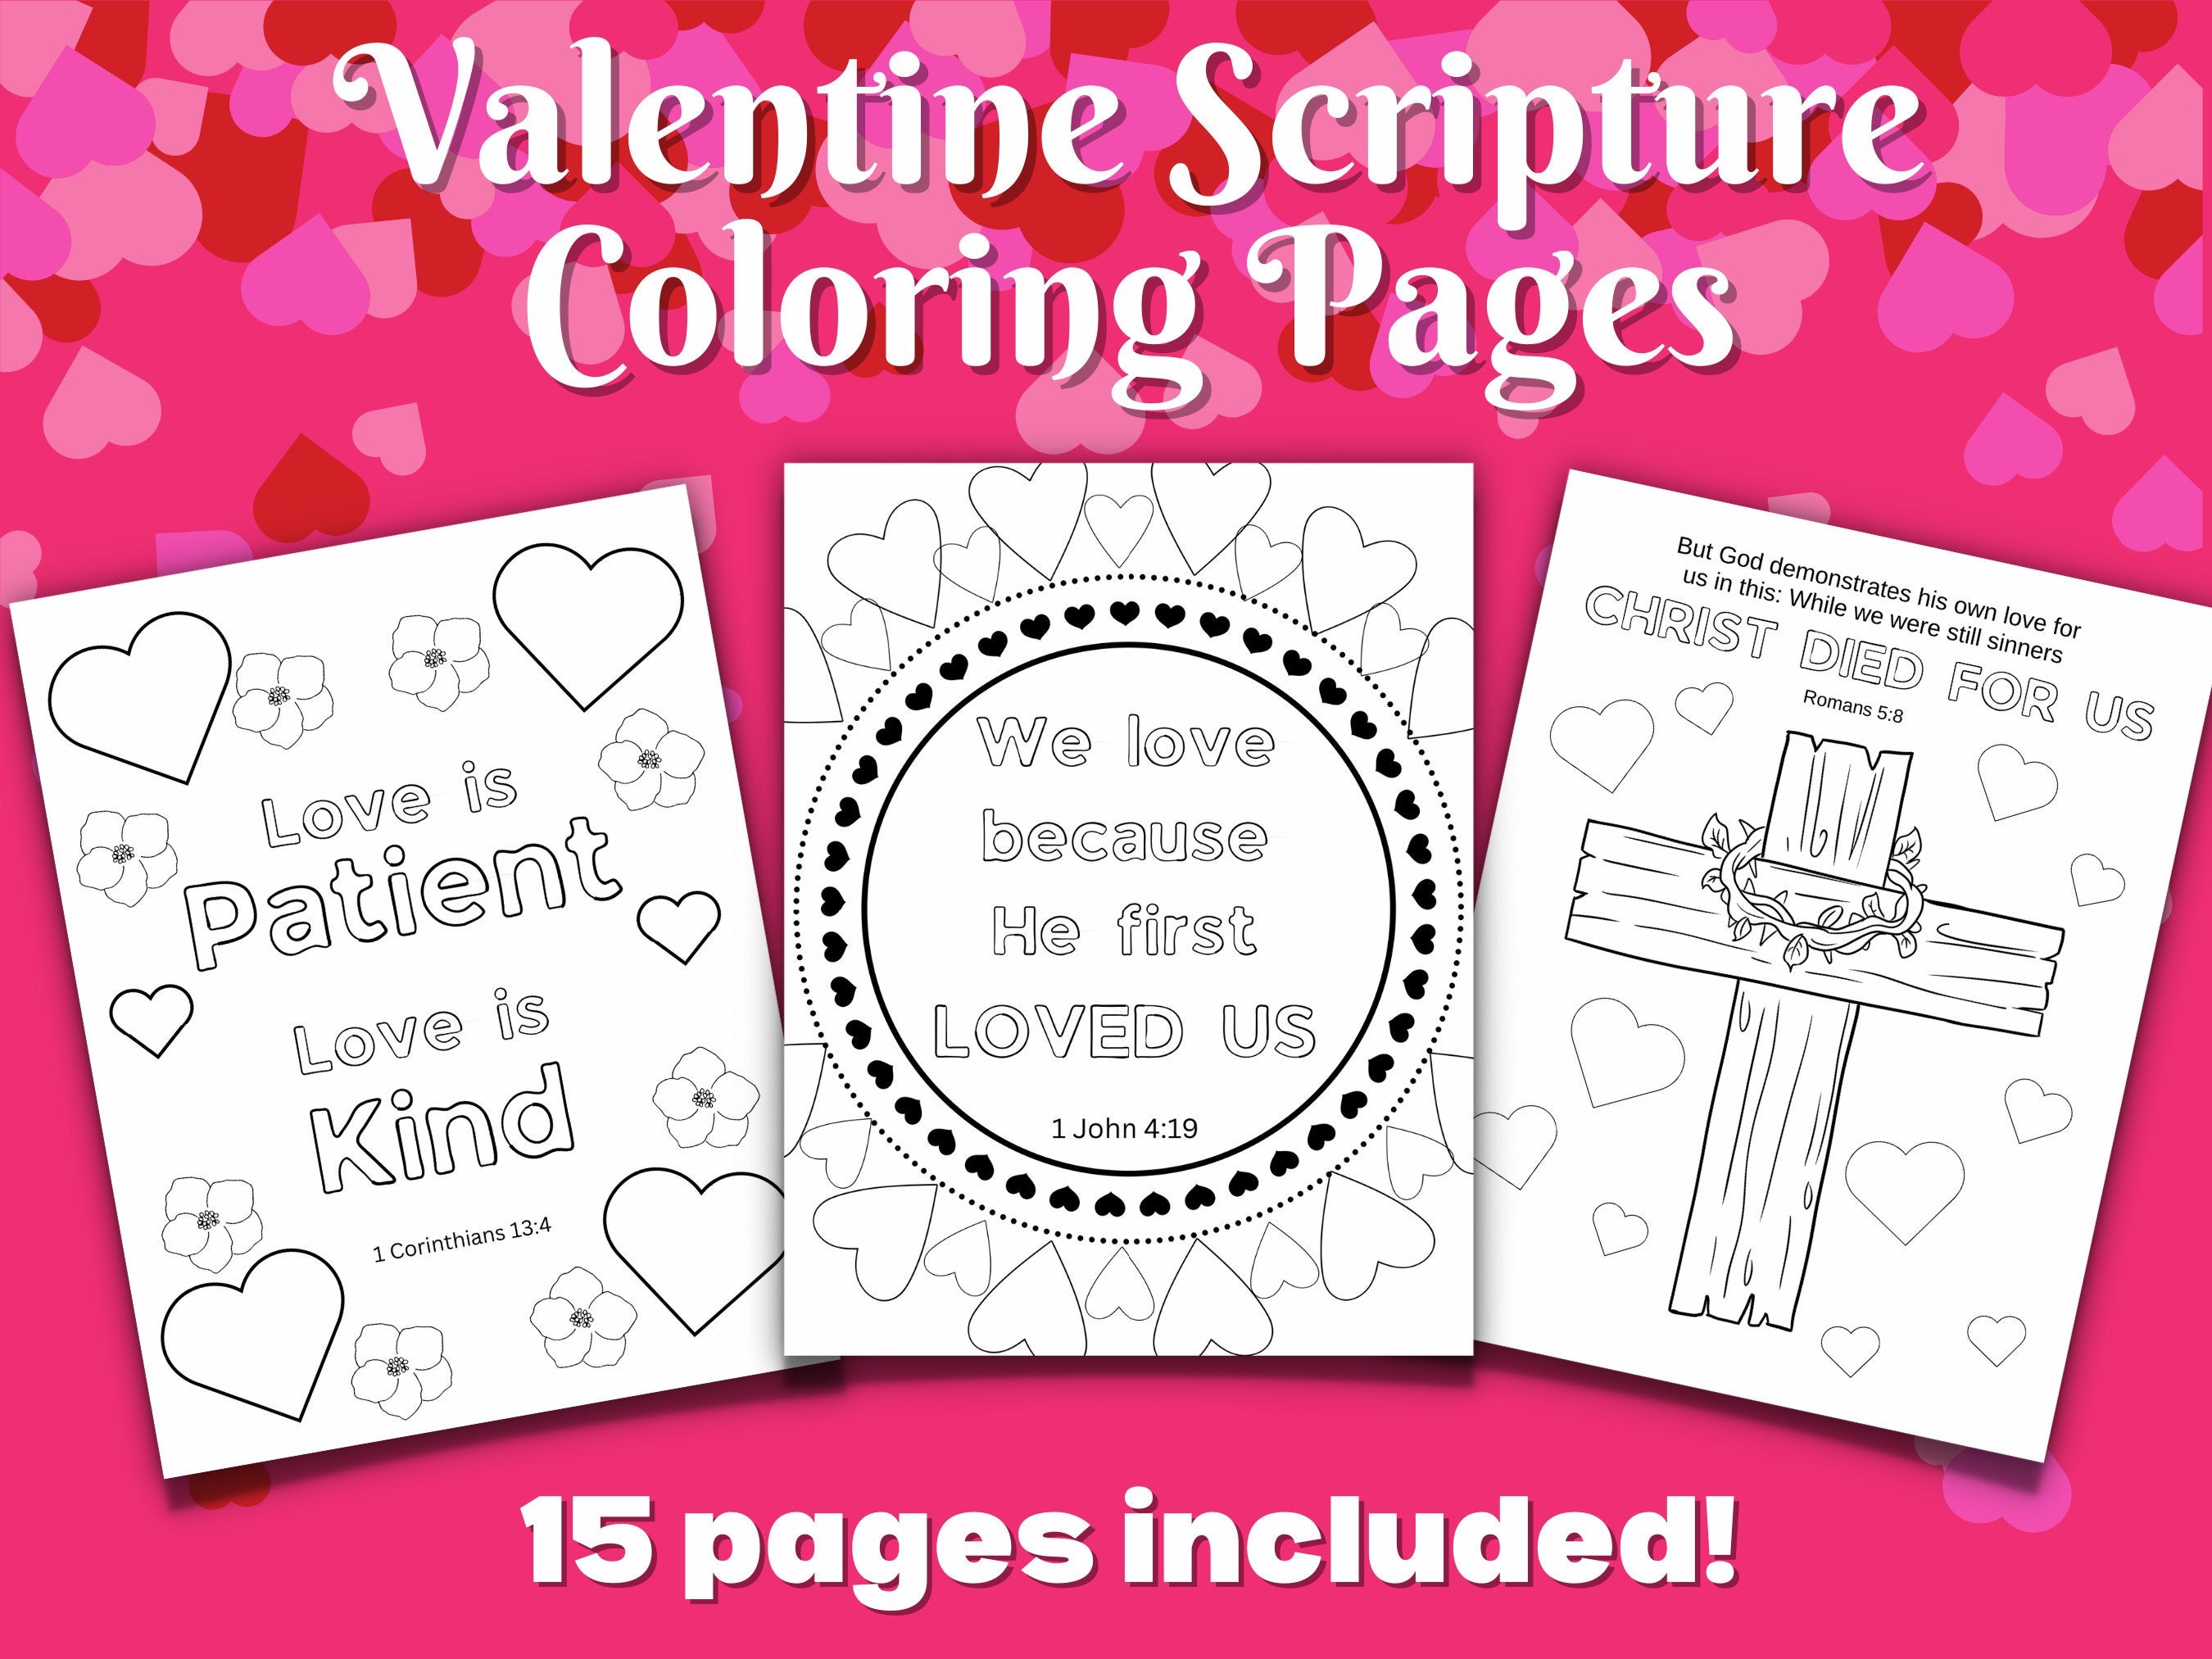 Valentines day scripture coloring pages kids adults valentines day coloring pages bible verse activity sunday school craft